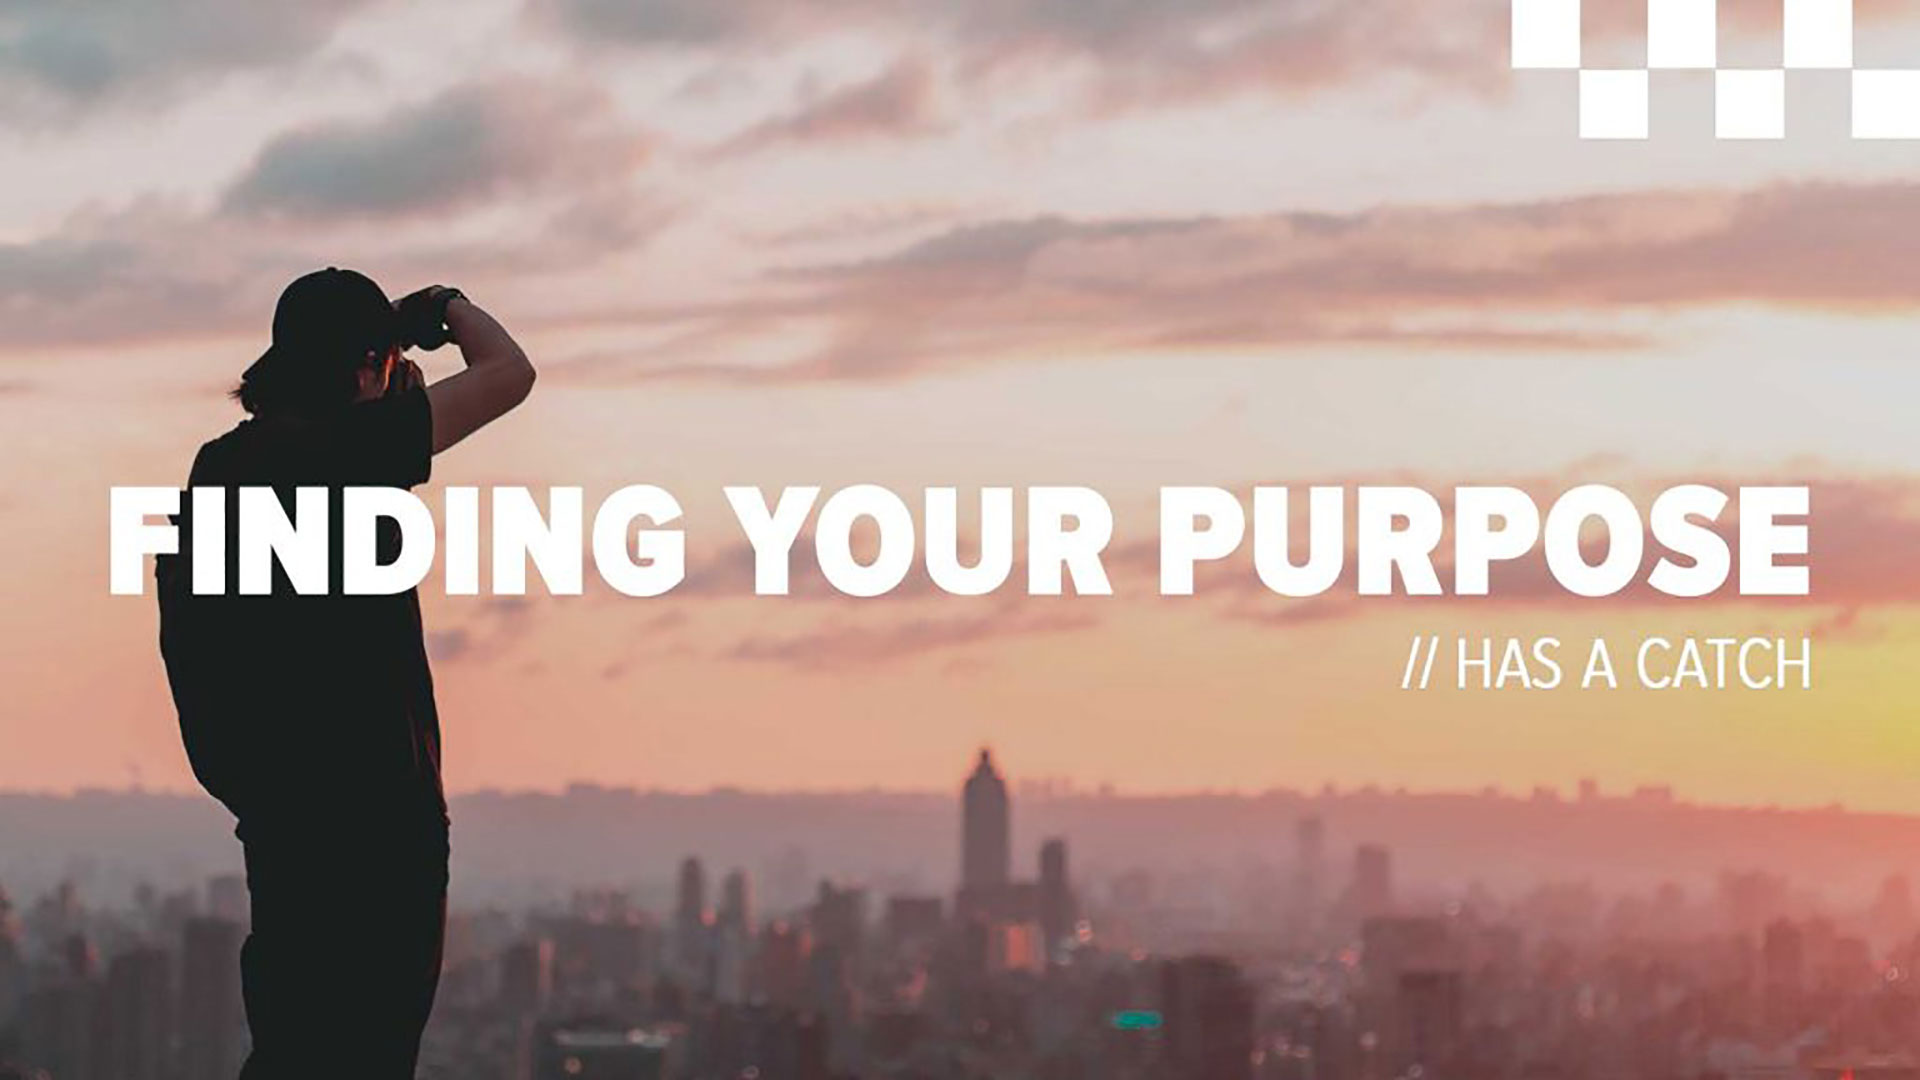 Series: Finding Your Purpose